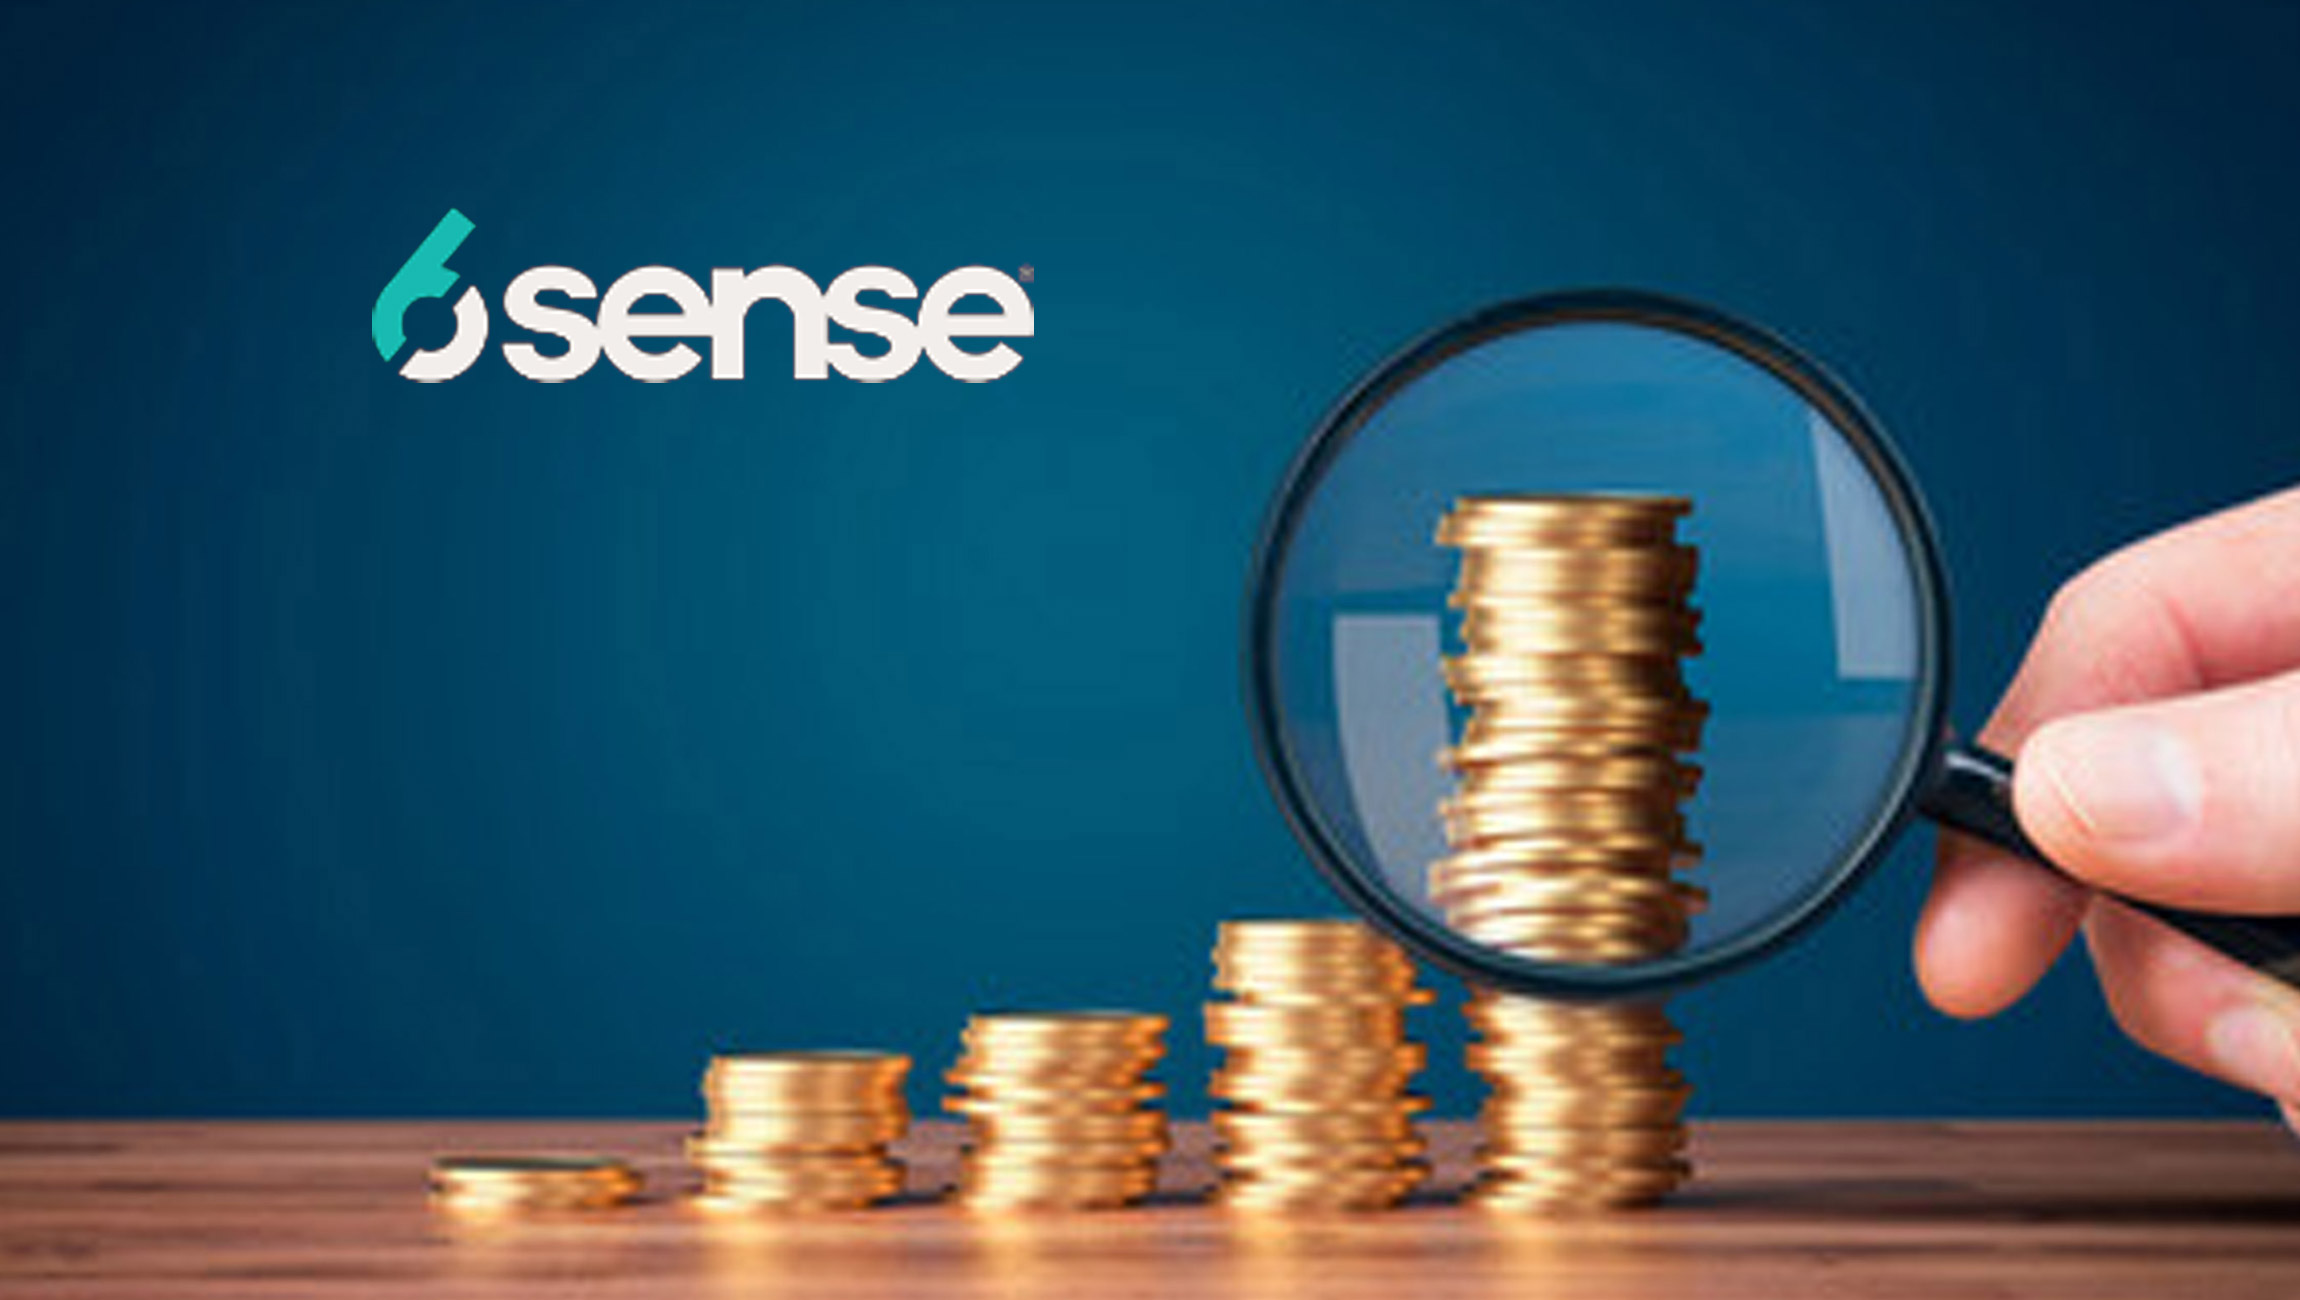 6sense Ranks No. 550 on the 2022 Inc. 5000 Annual List, With a Three-Year Revenue Growth of 1136 Percent